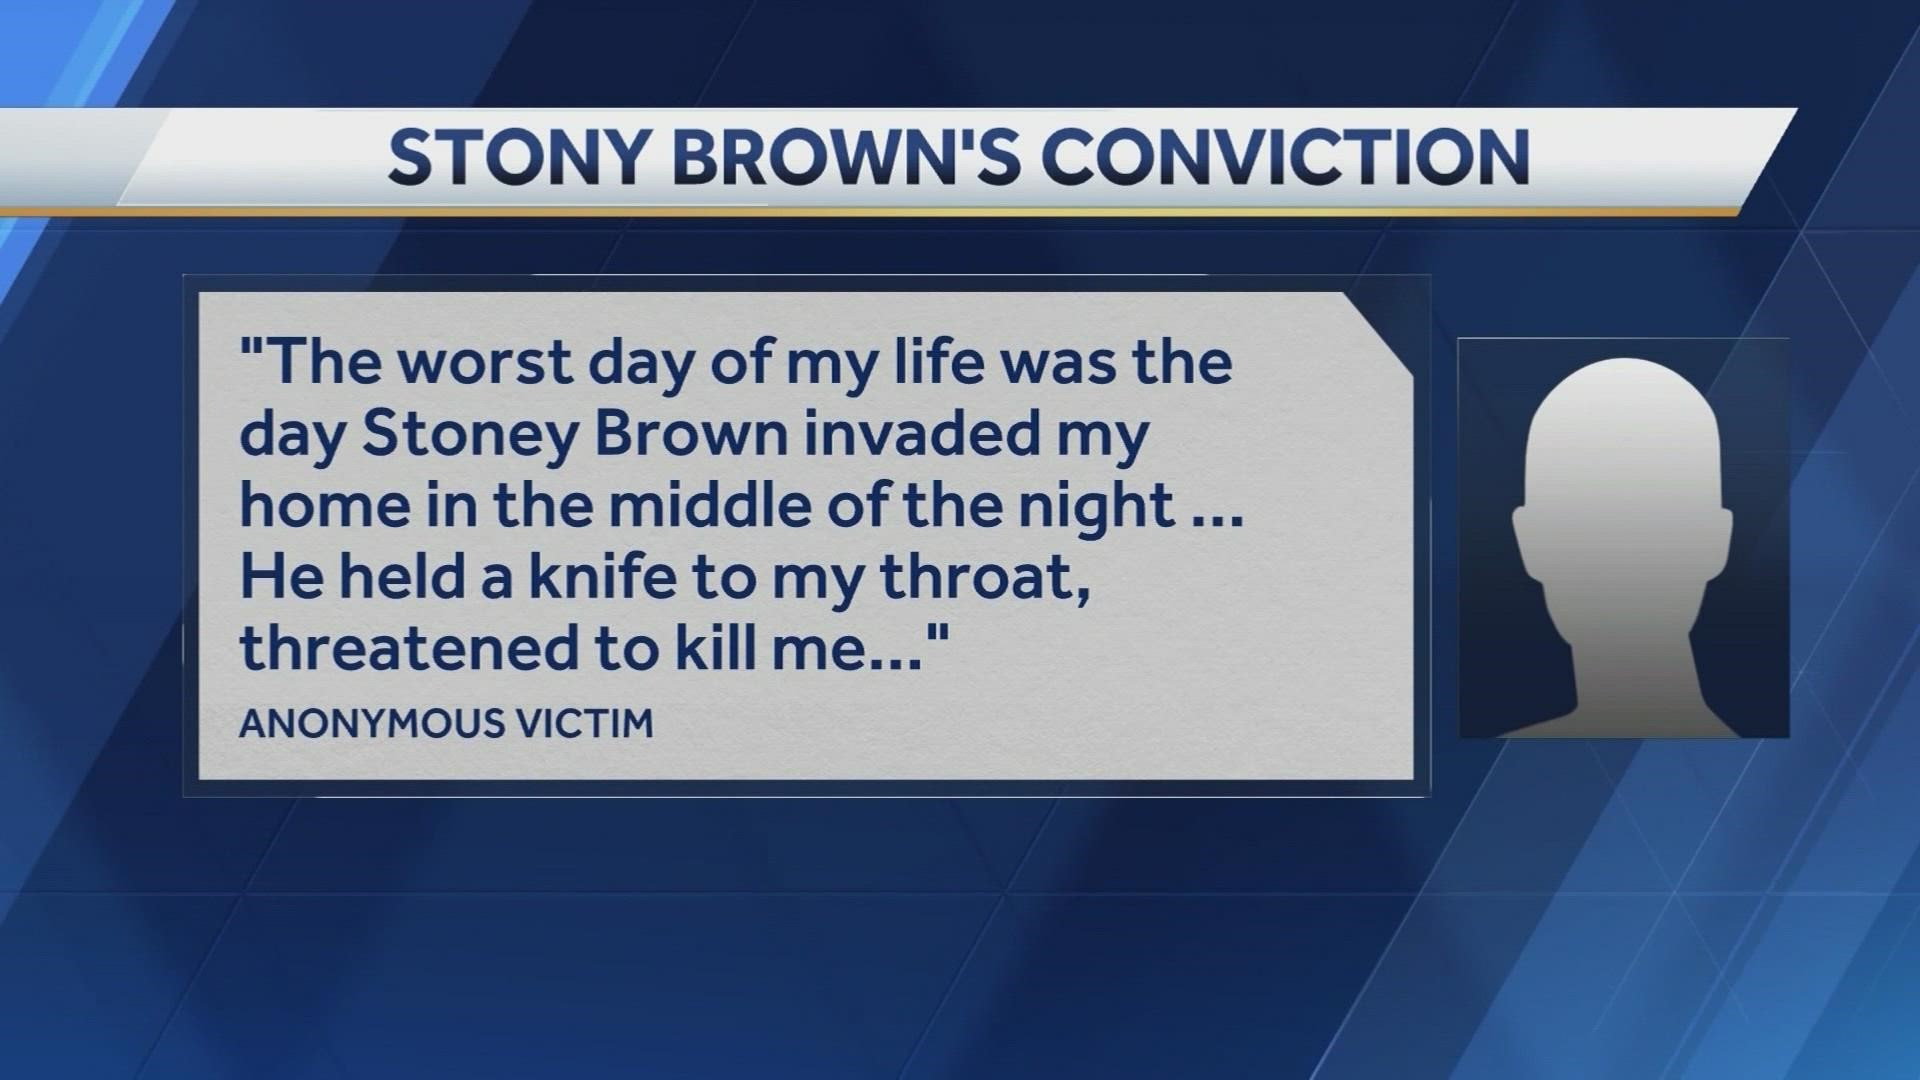 Stoney Brown pleaded guilty to four counts of rape. In exchange, 15 other felonies were dismissed.